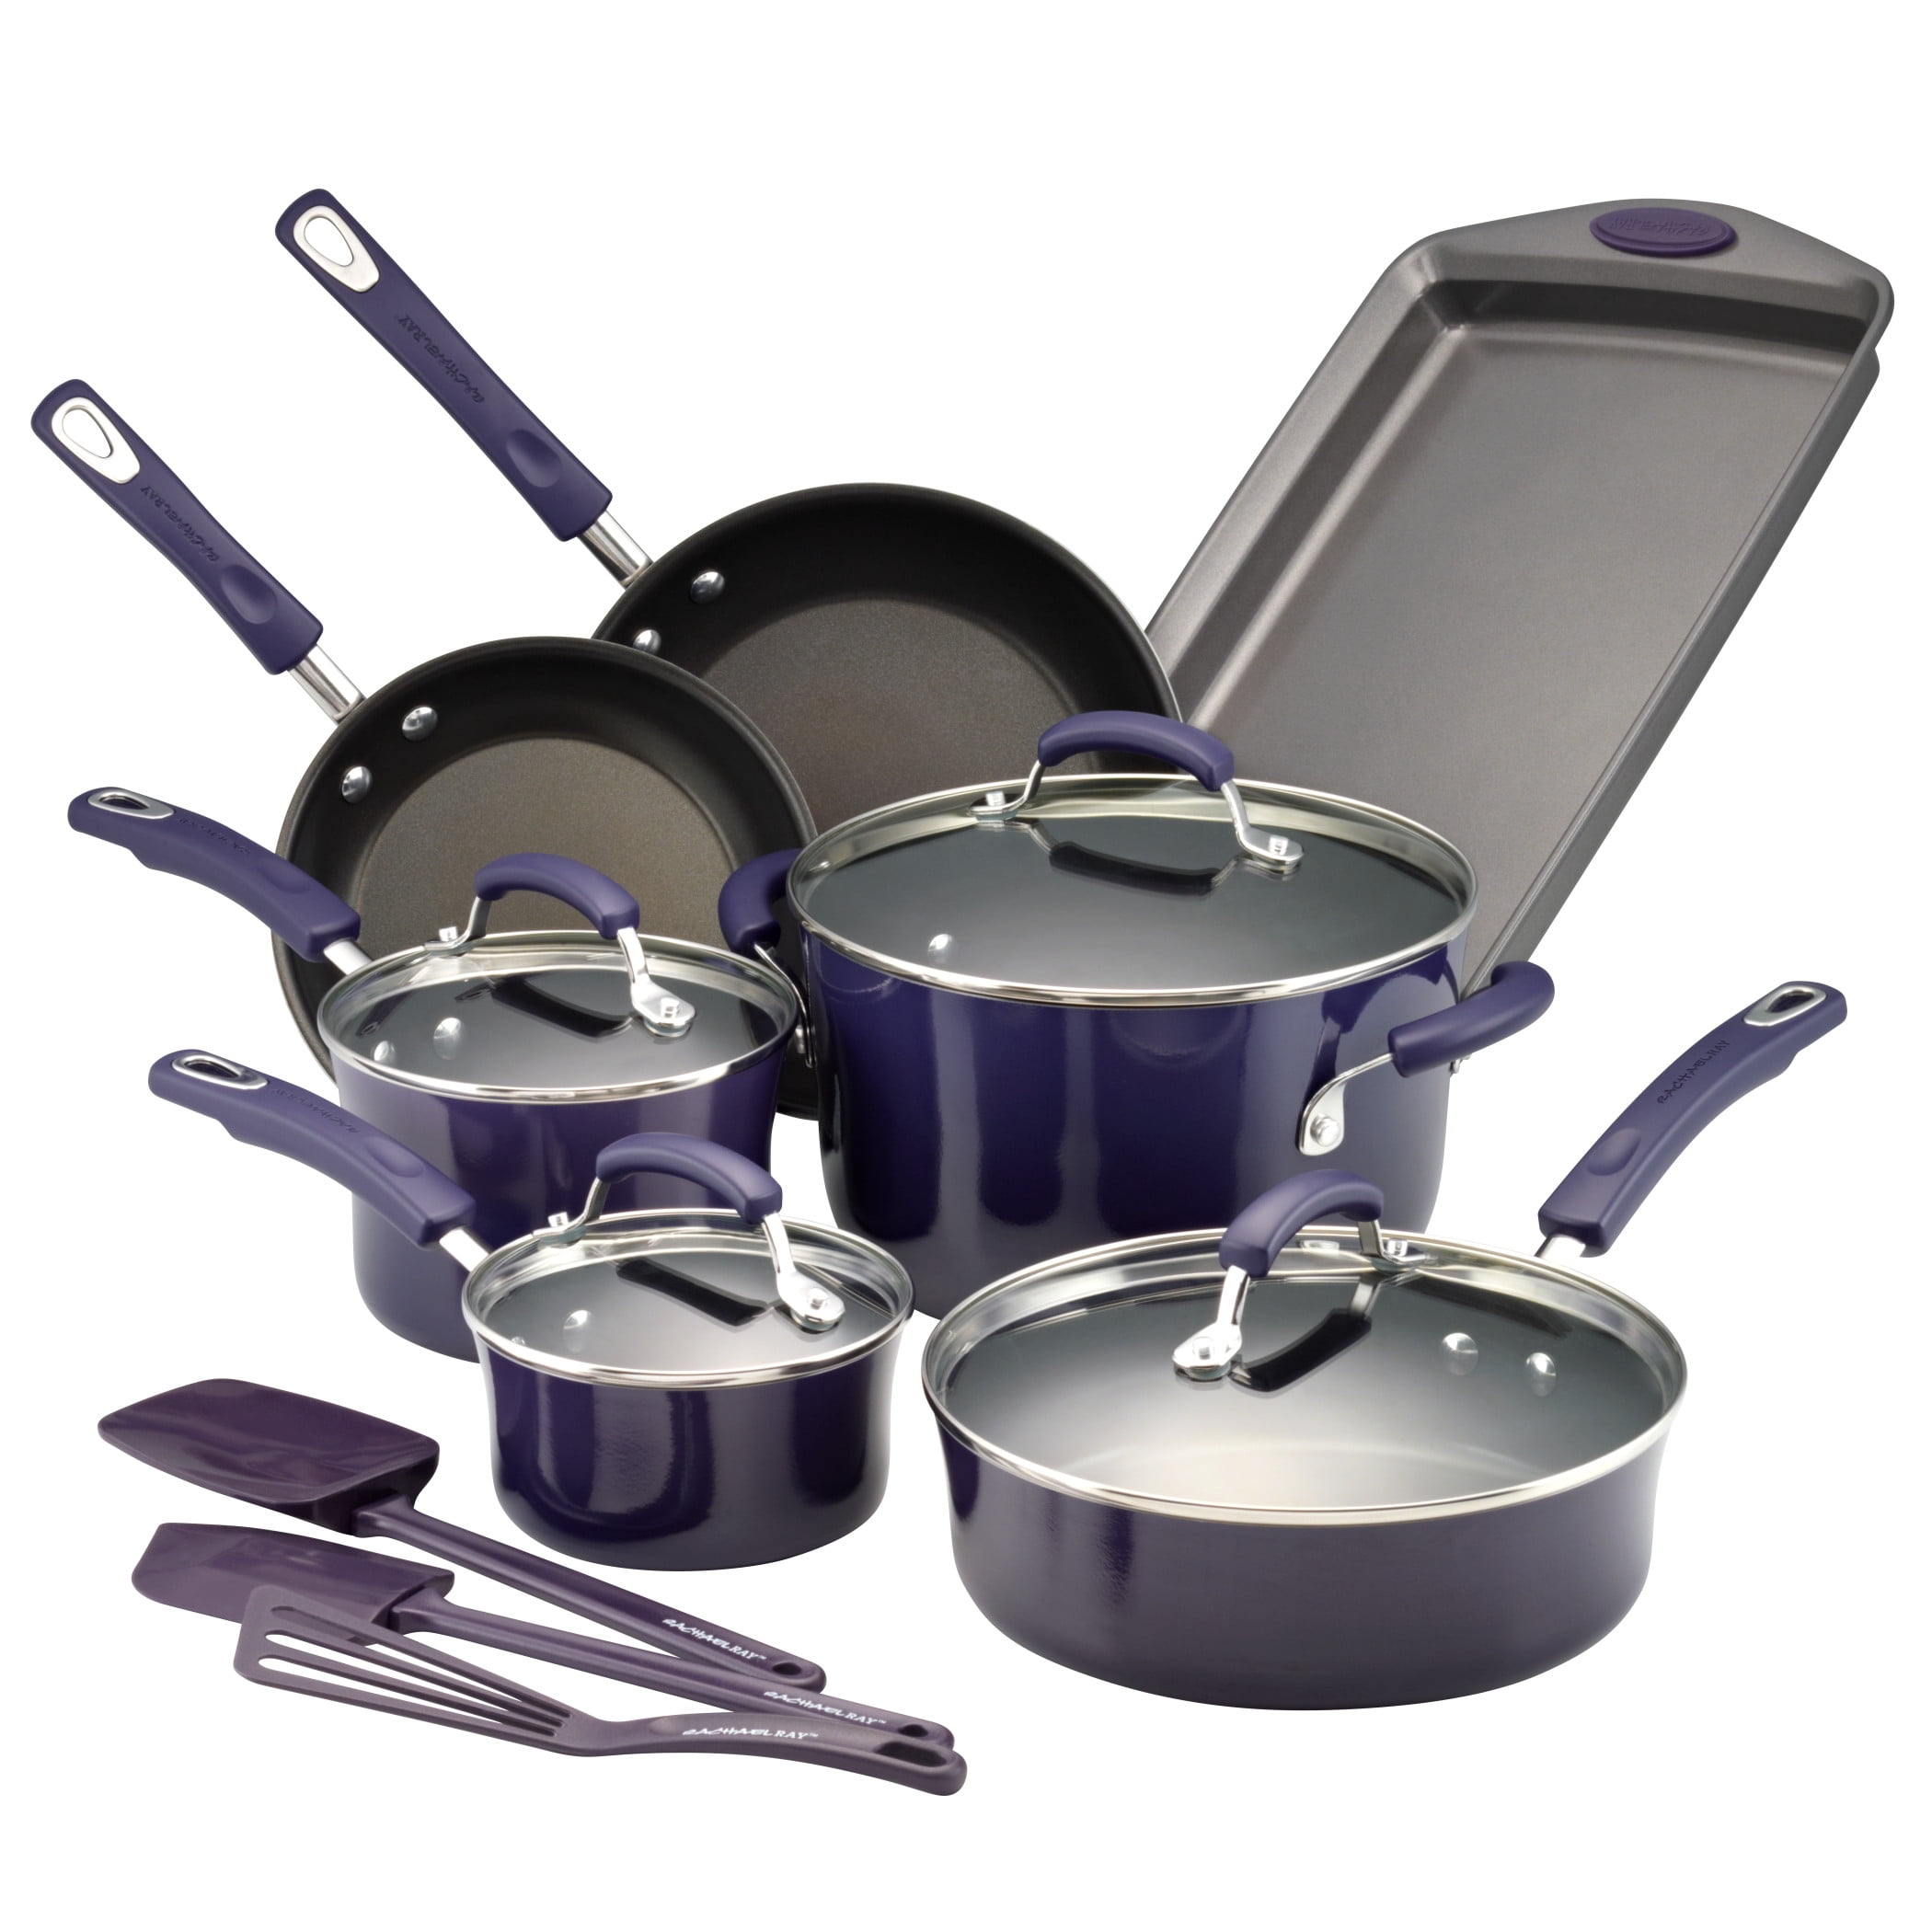 Rachael Ray Hard Anodized Cookware Set – 14 piece (Non-Stick) Only